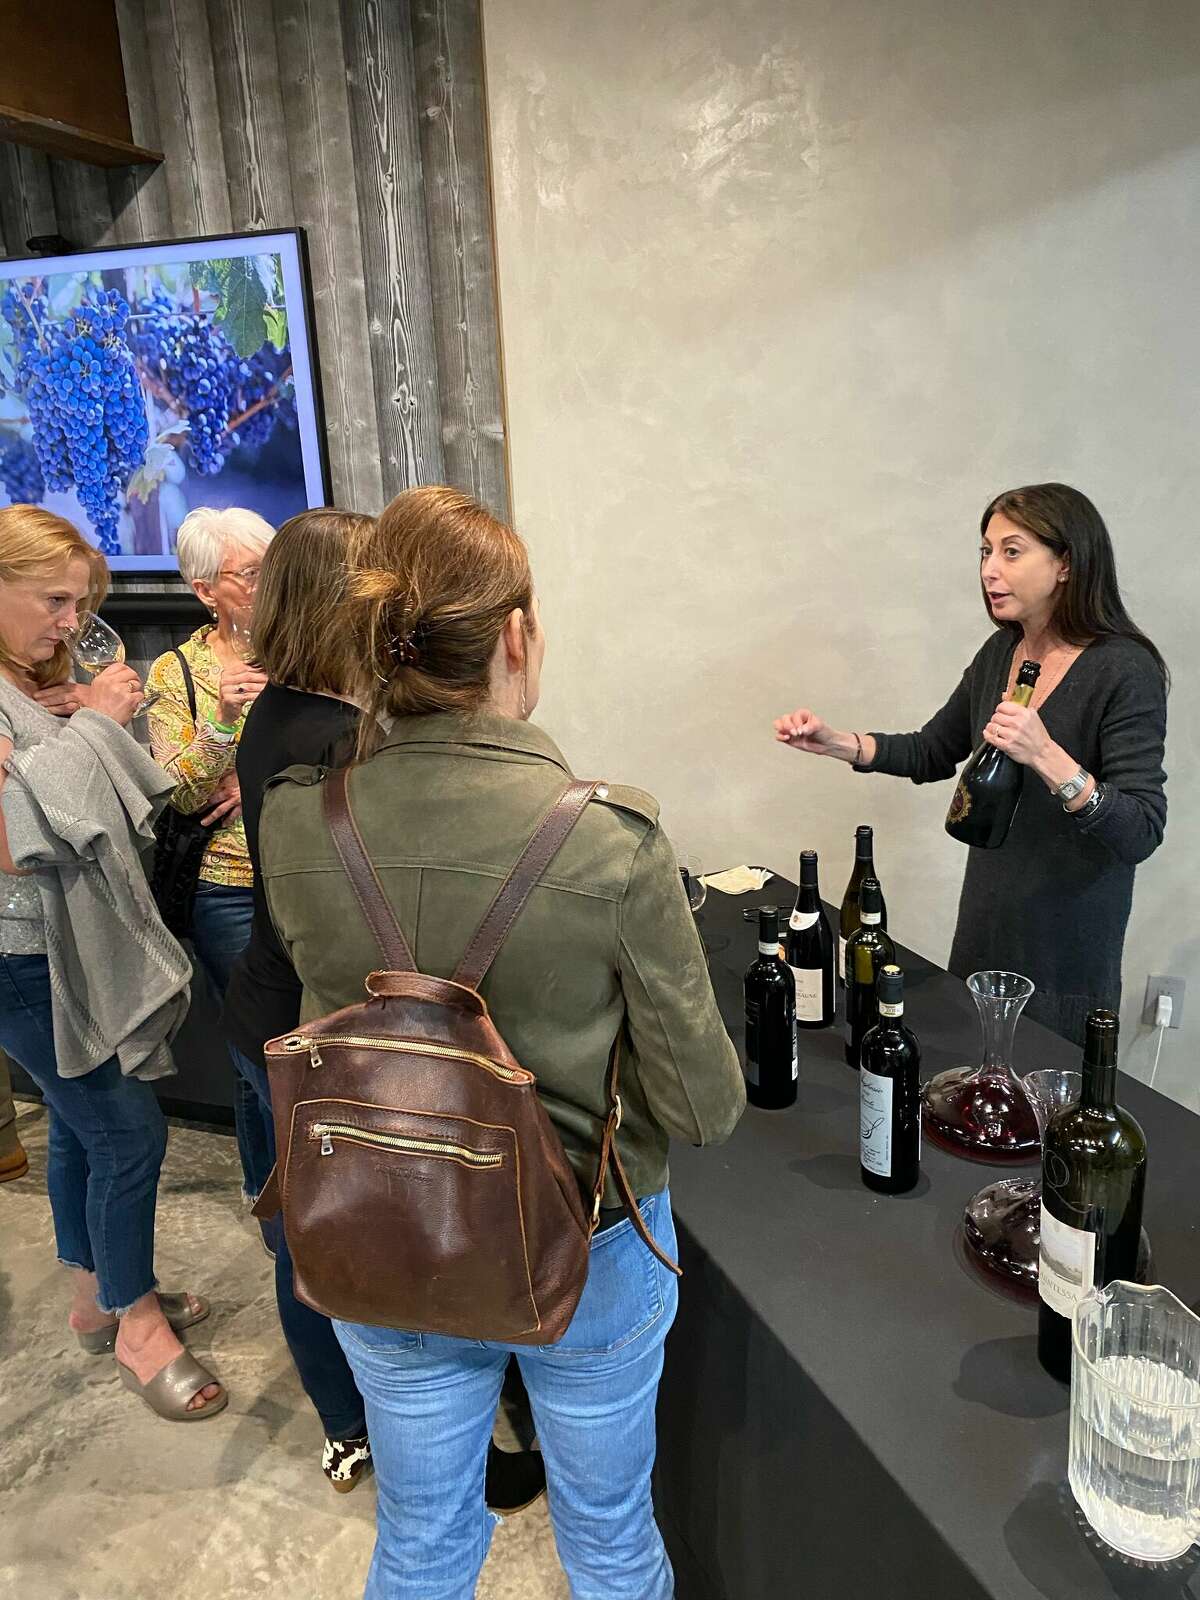 At a grand opening of the brand-new wine storage vault, local liquor retailers and suppliers provided beverage tastings to guests.